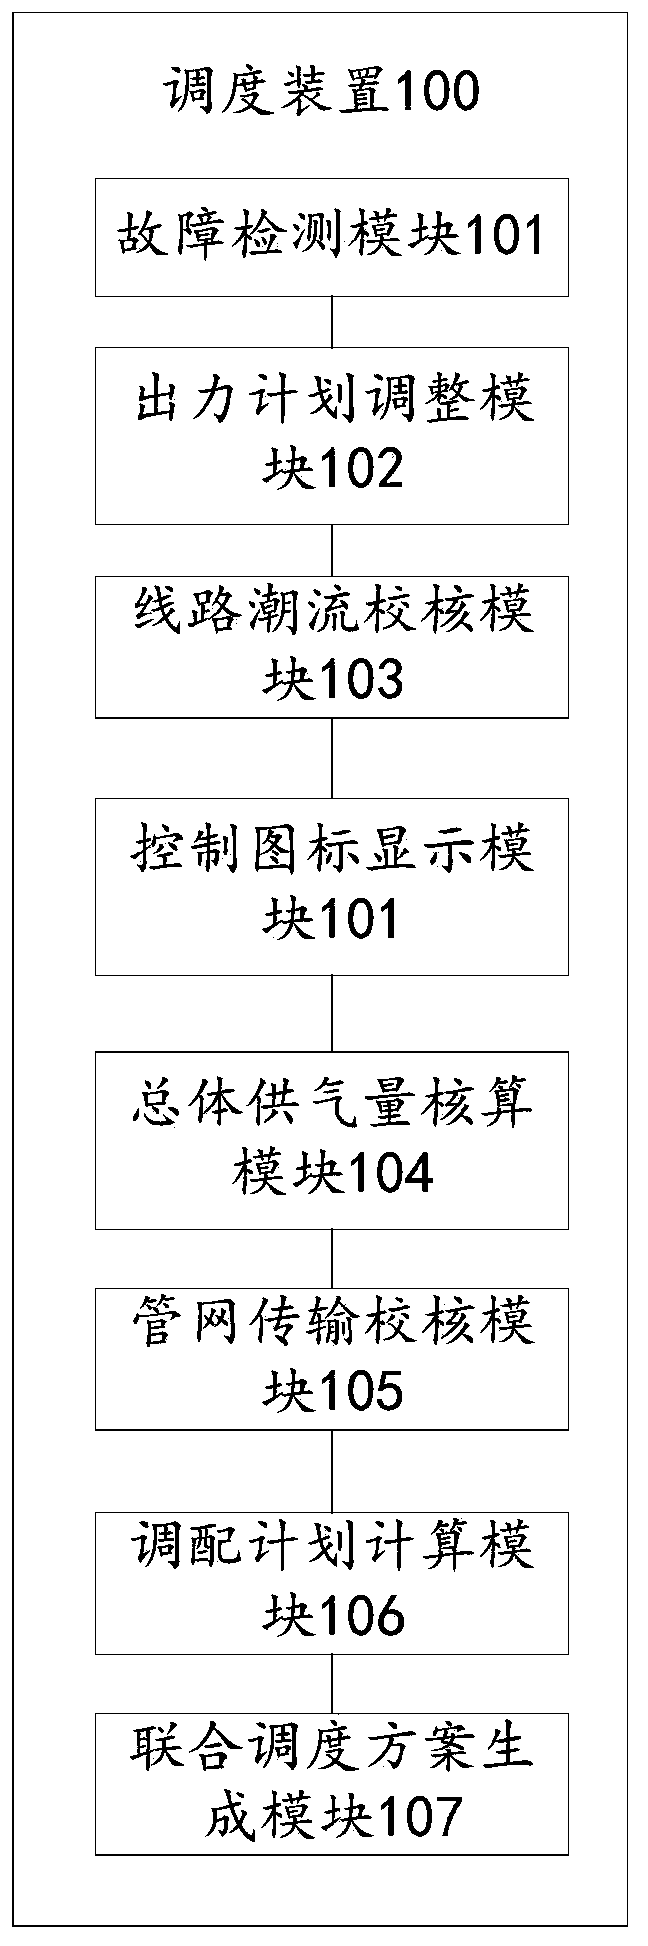 Emergency joint dispatching method and device for natural gas system and electric power system